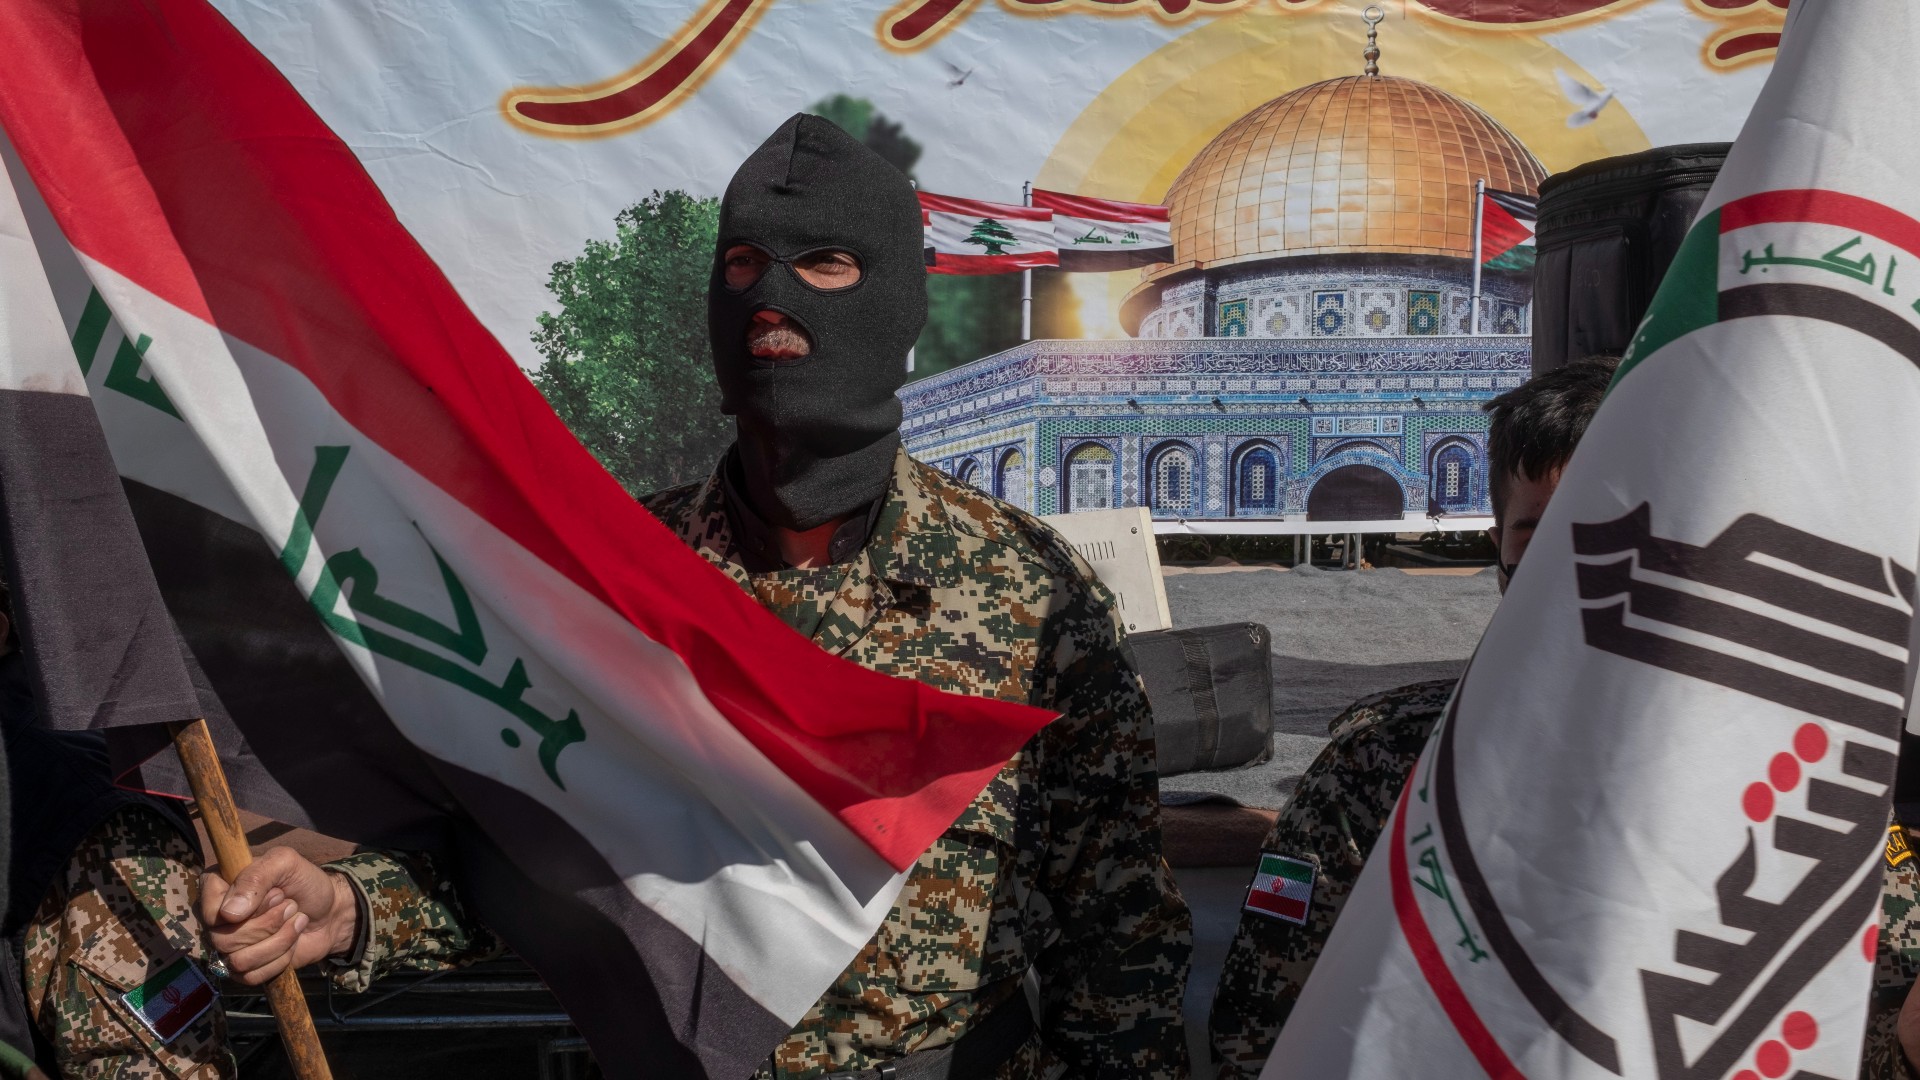 A member of the Iranian Basij paramilitary force holds an Iraqi flag while standing guard next to a flag of the Hashd al-Shaabi Iraqi paramilitaries during a rally in Tehran in April (Reuters)